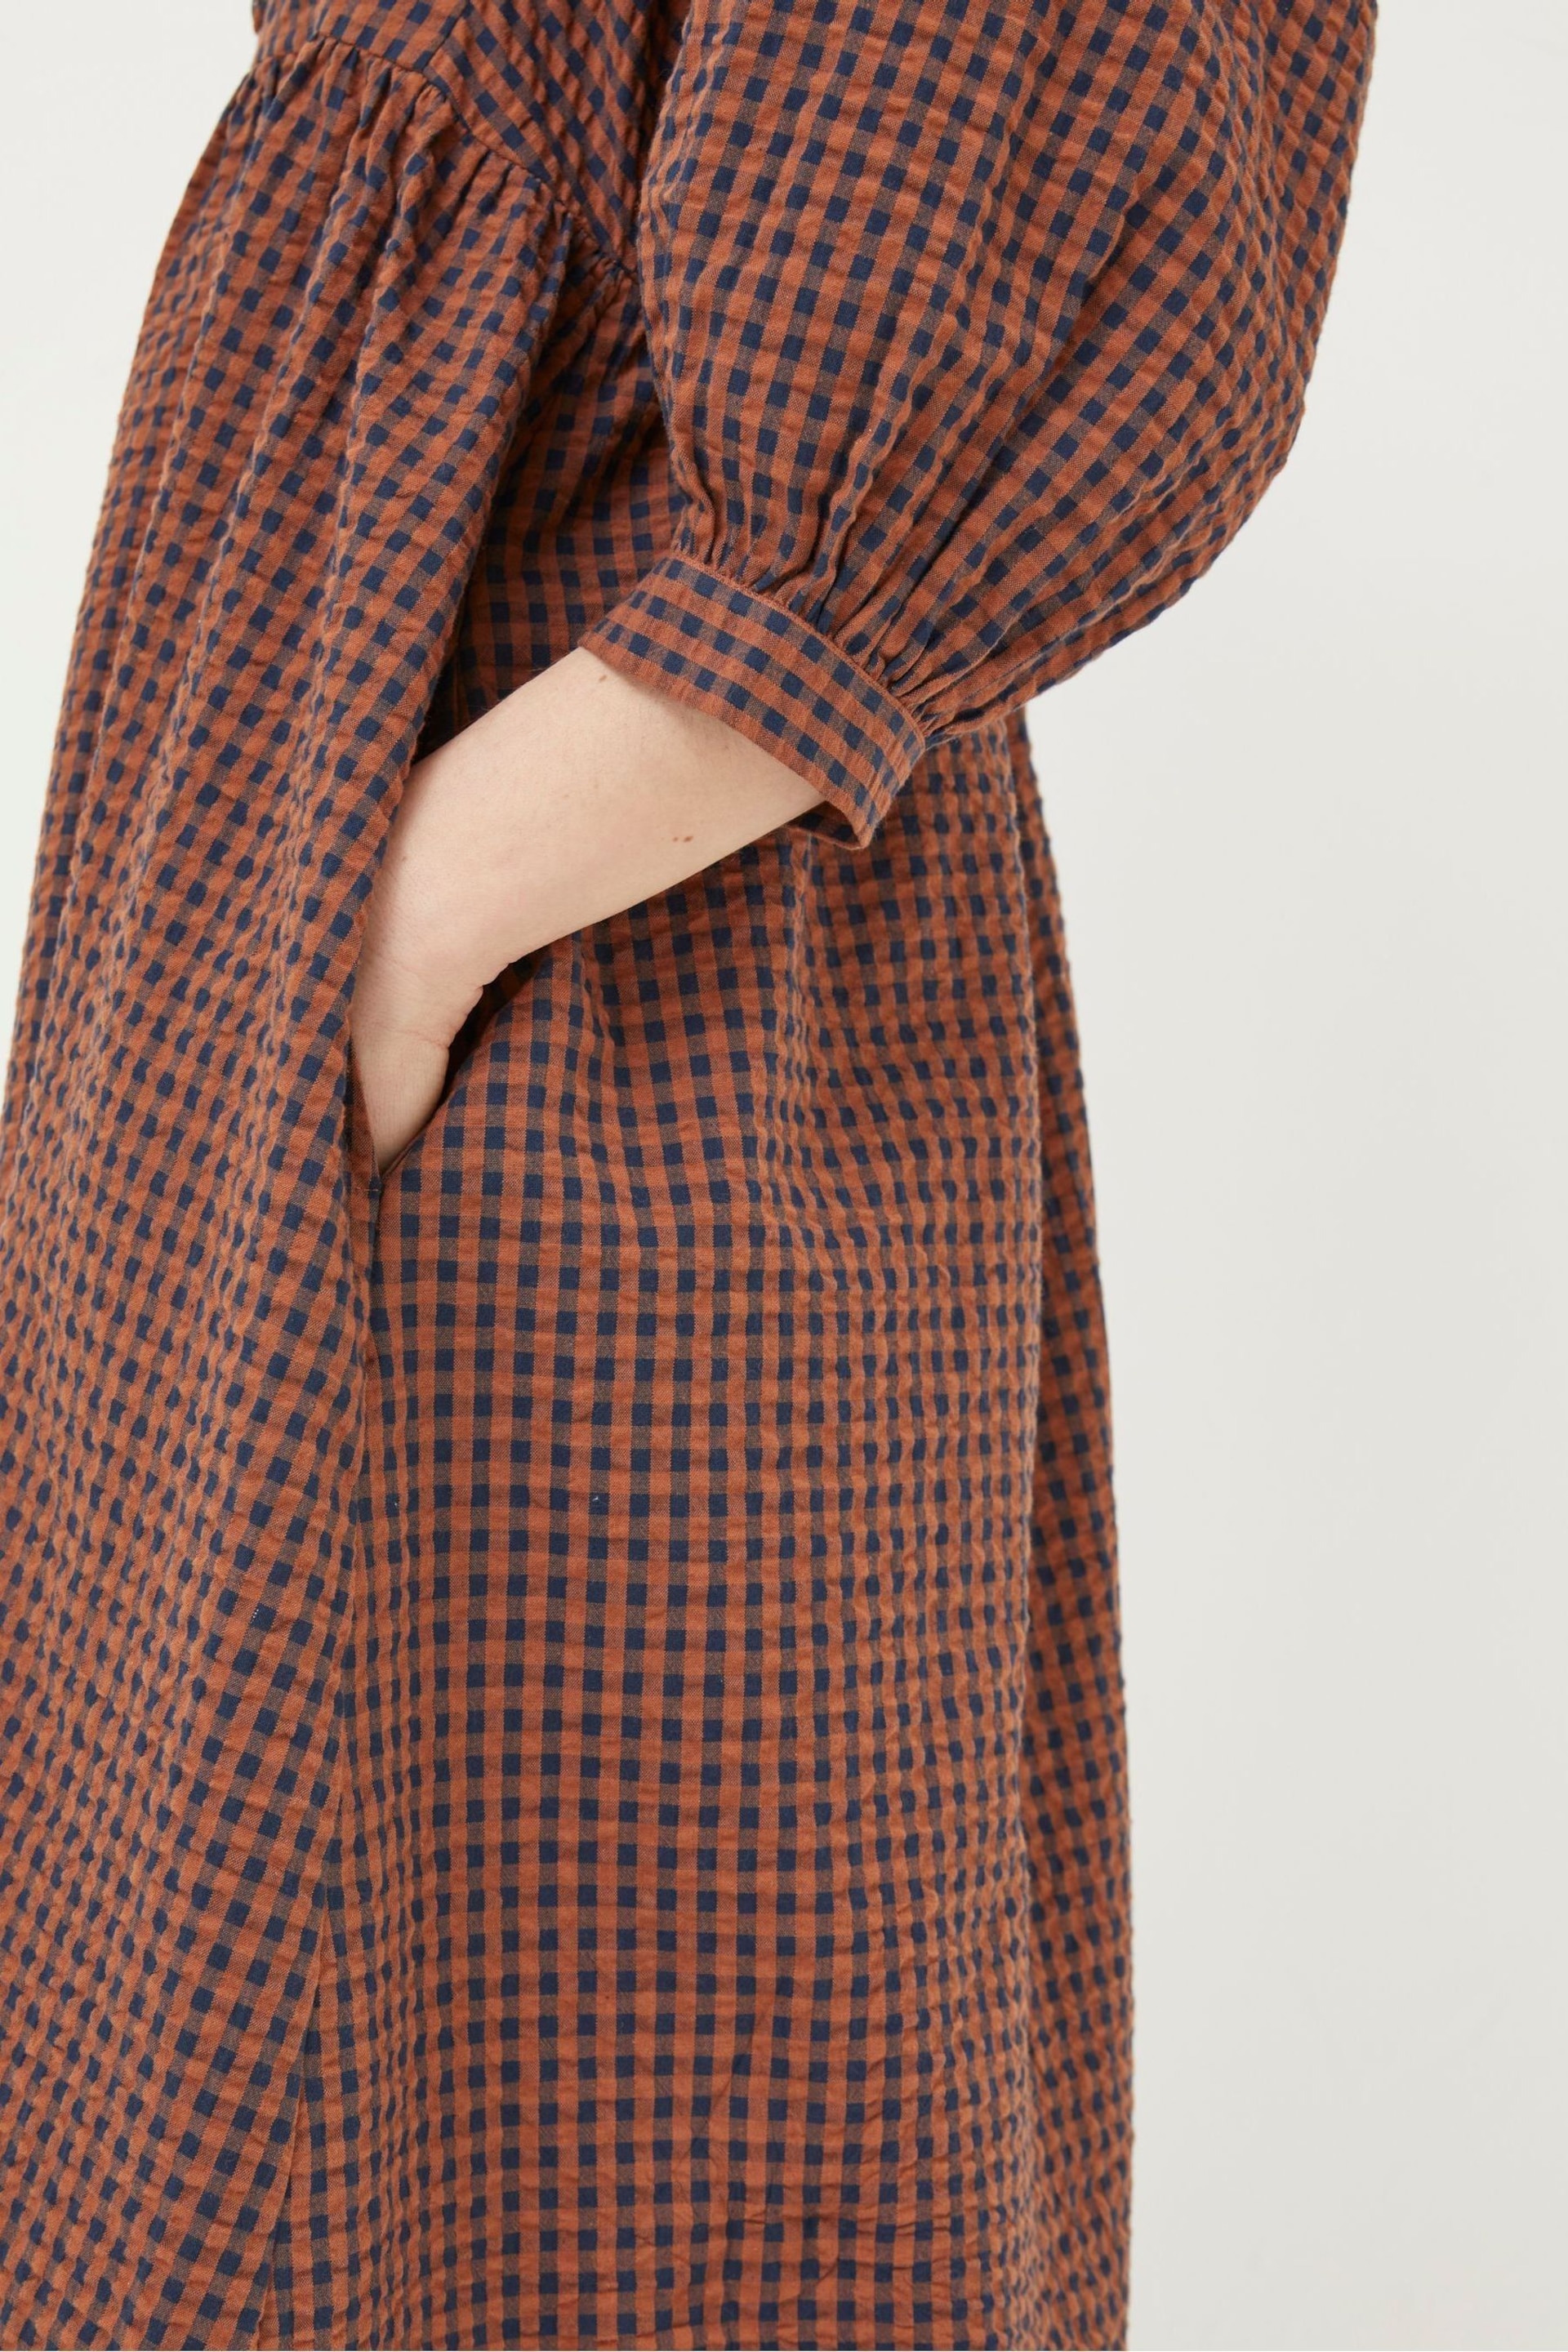 FatFace Brown Gingham Midi Dress - Image 5 of 7